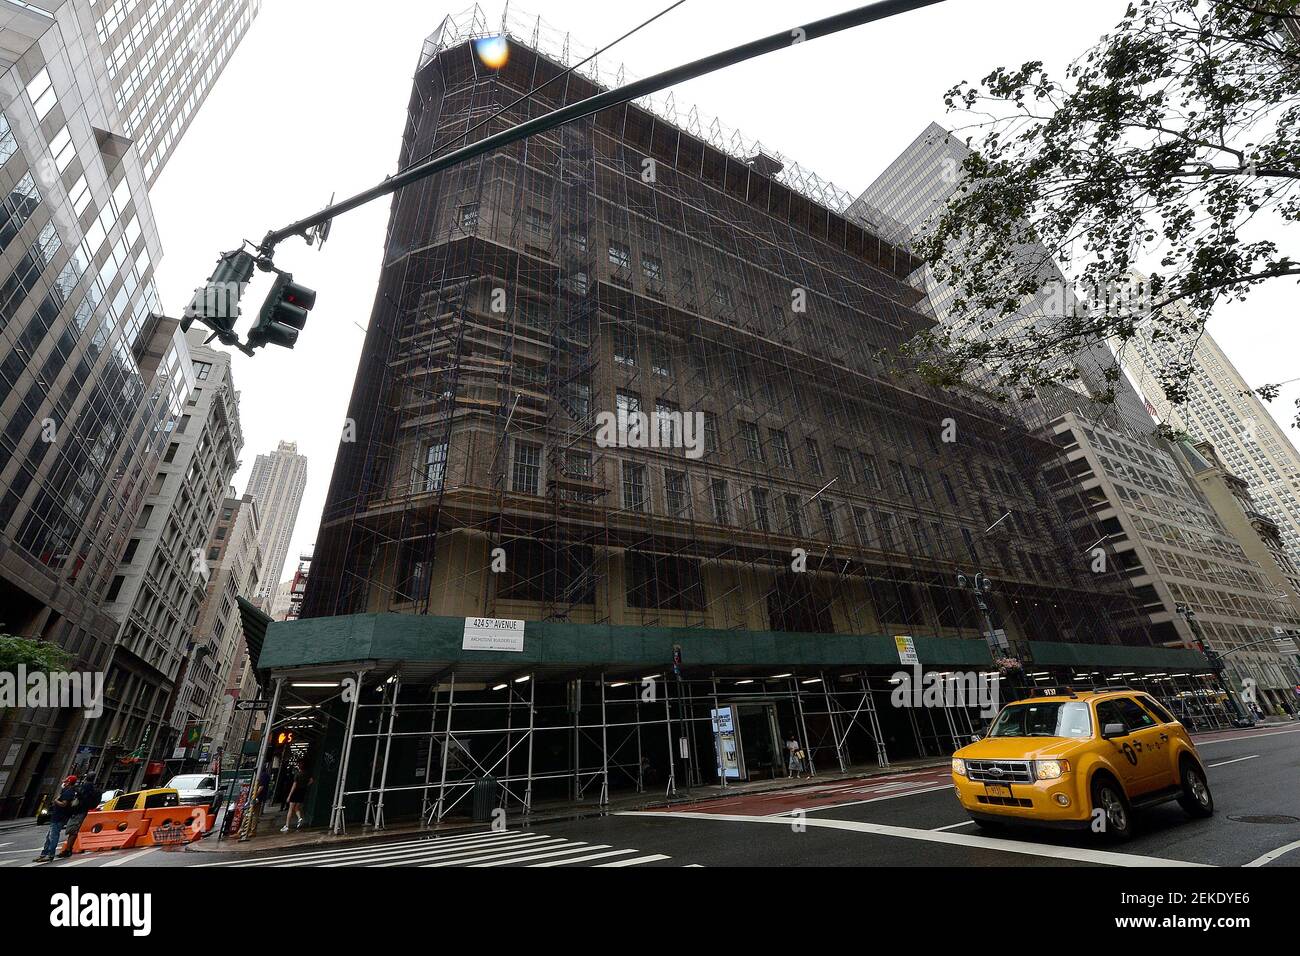 Exterior view of the former department store “Lord & Taylor” on 5th Avenue,  purchased by Amazon, who announced that it will be hiring 2,000 employess  in NYC and locating them in the